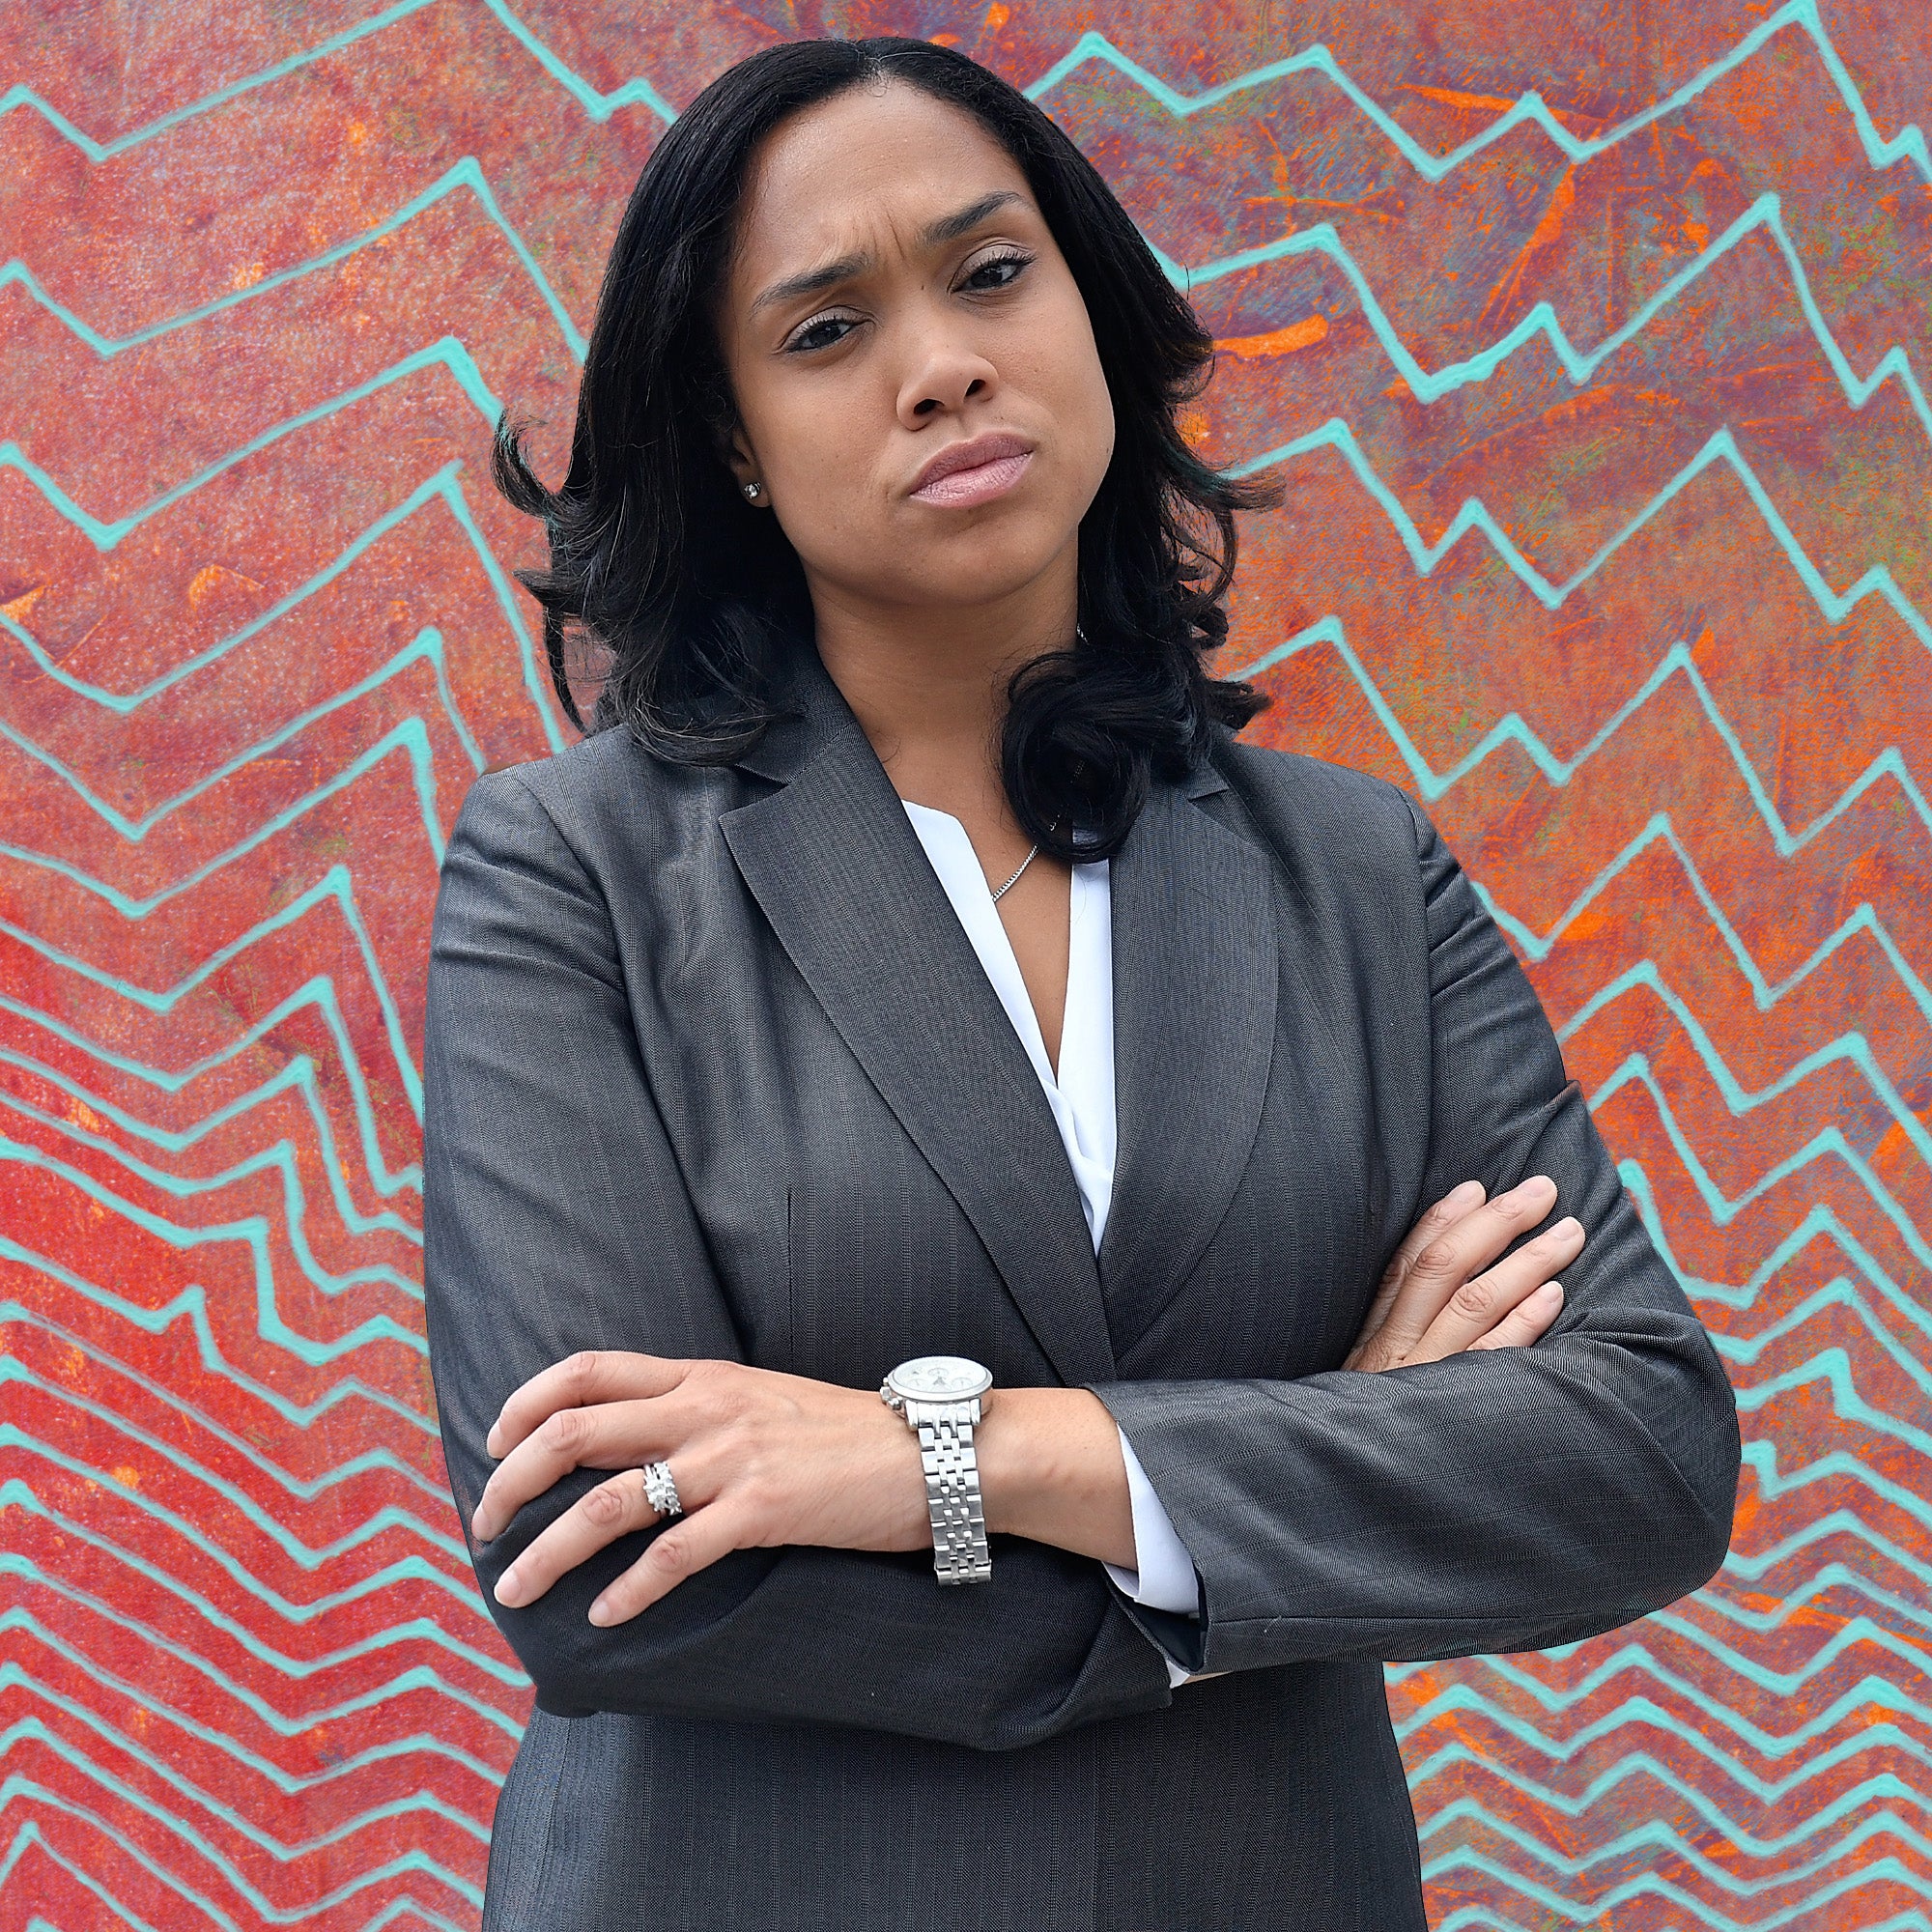 Ladies, Marilyn Mosby Just Dropped Career Advice That Involves Your Love Life And You'll Want To Hear This